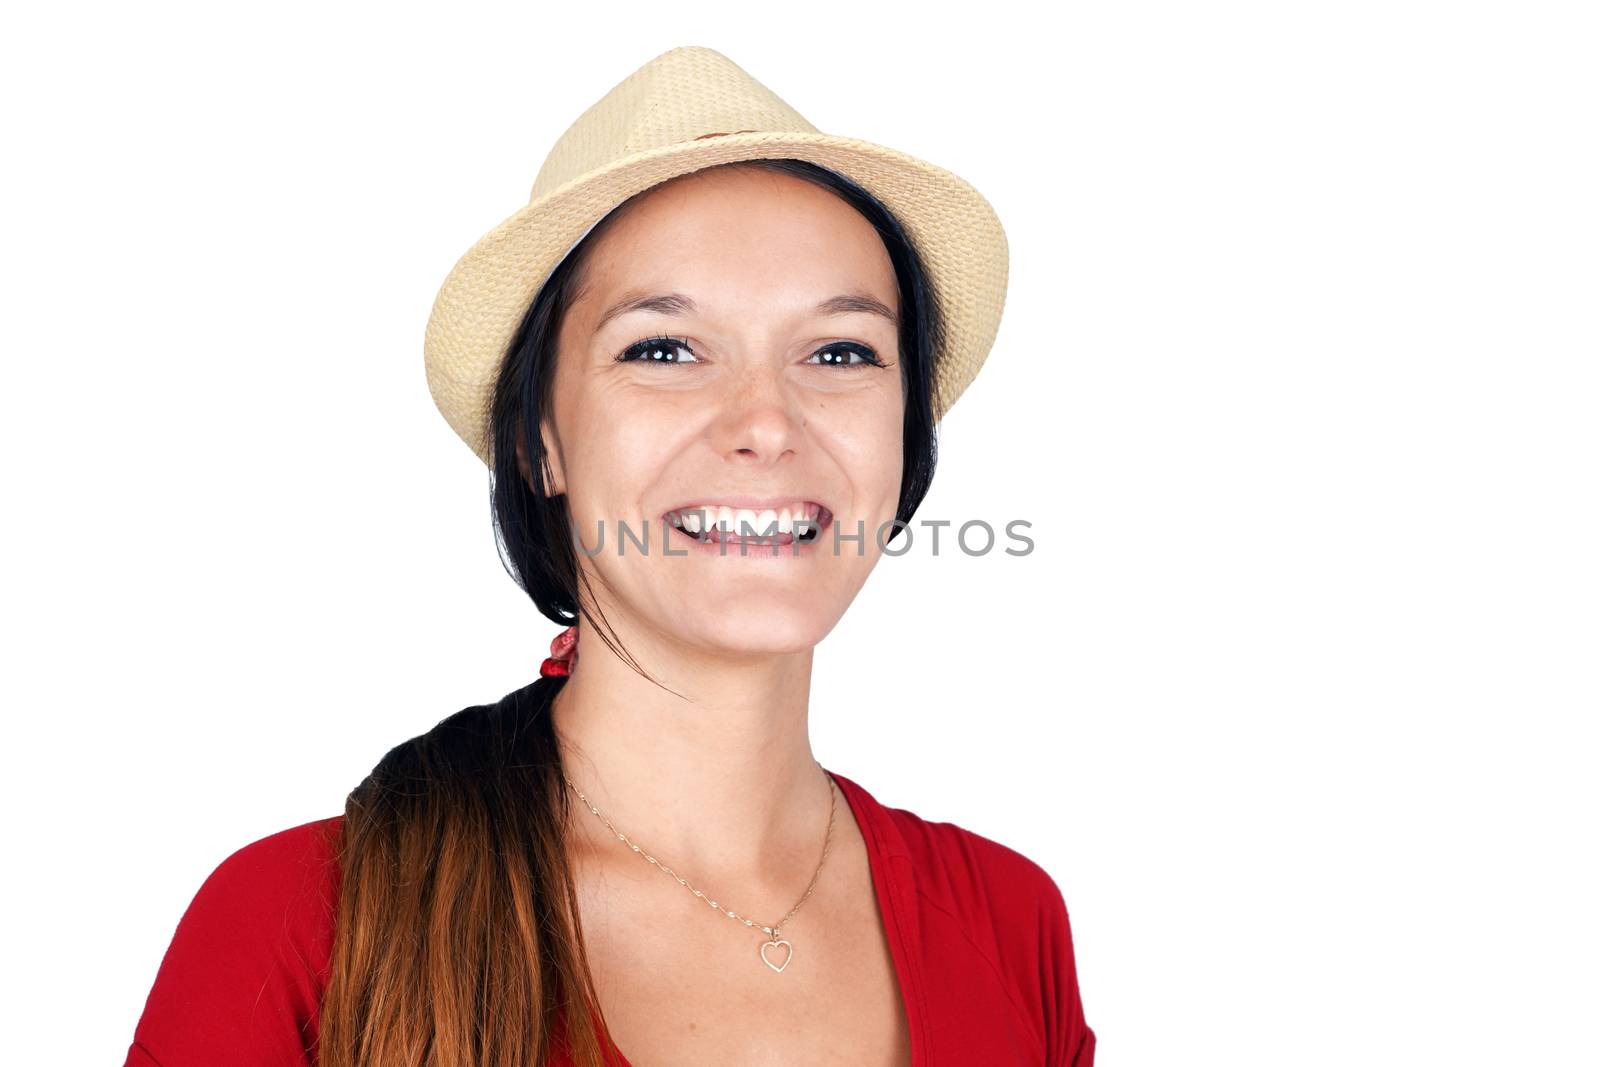 Woman with hat laughing by Mirage3